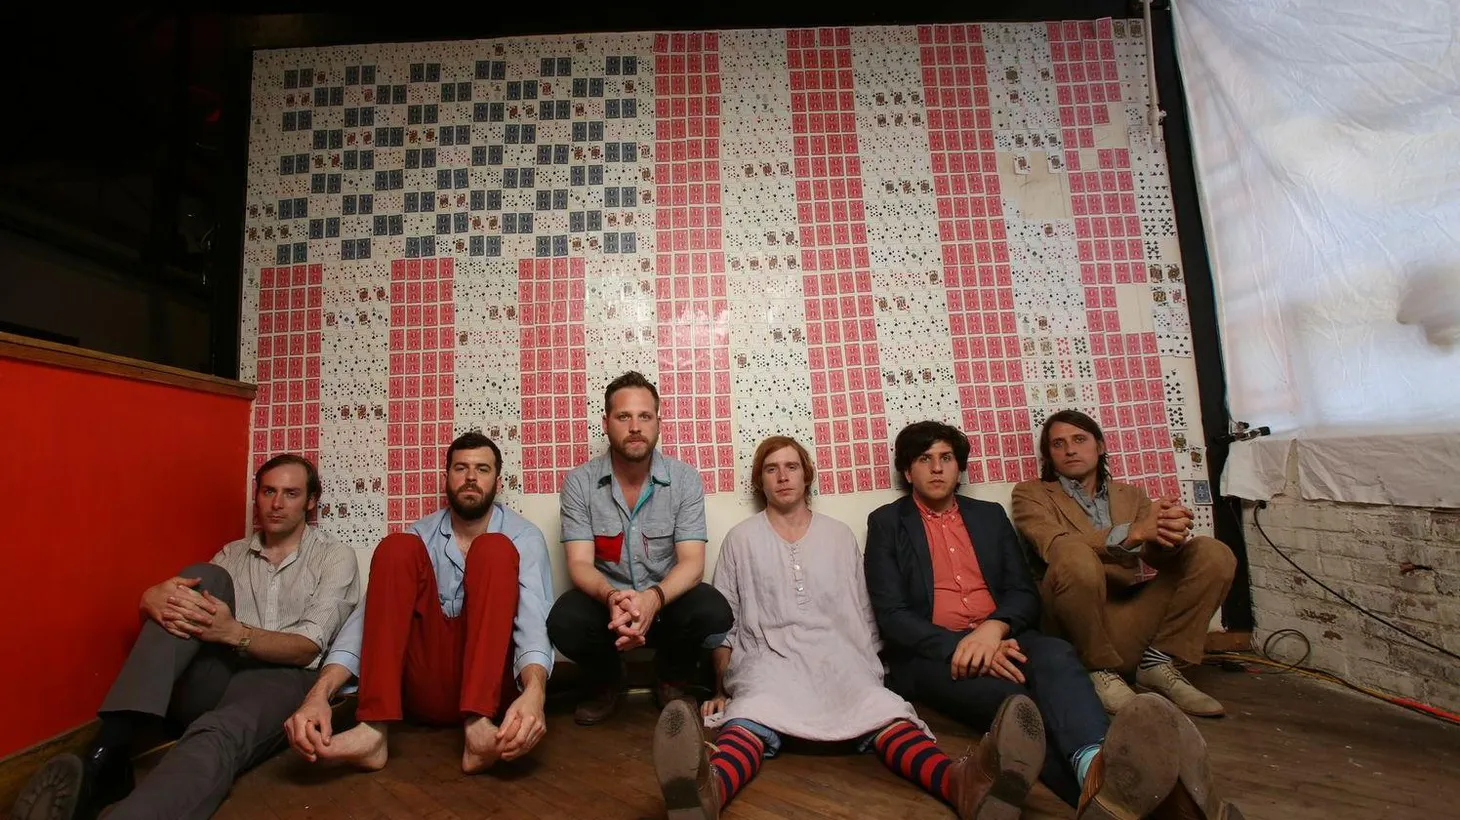 Philly-based favorites Dr. Dog visited our studio to preview selections from their album B-Room back in 2013.